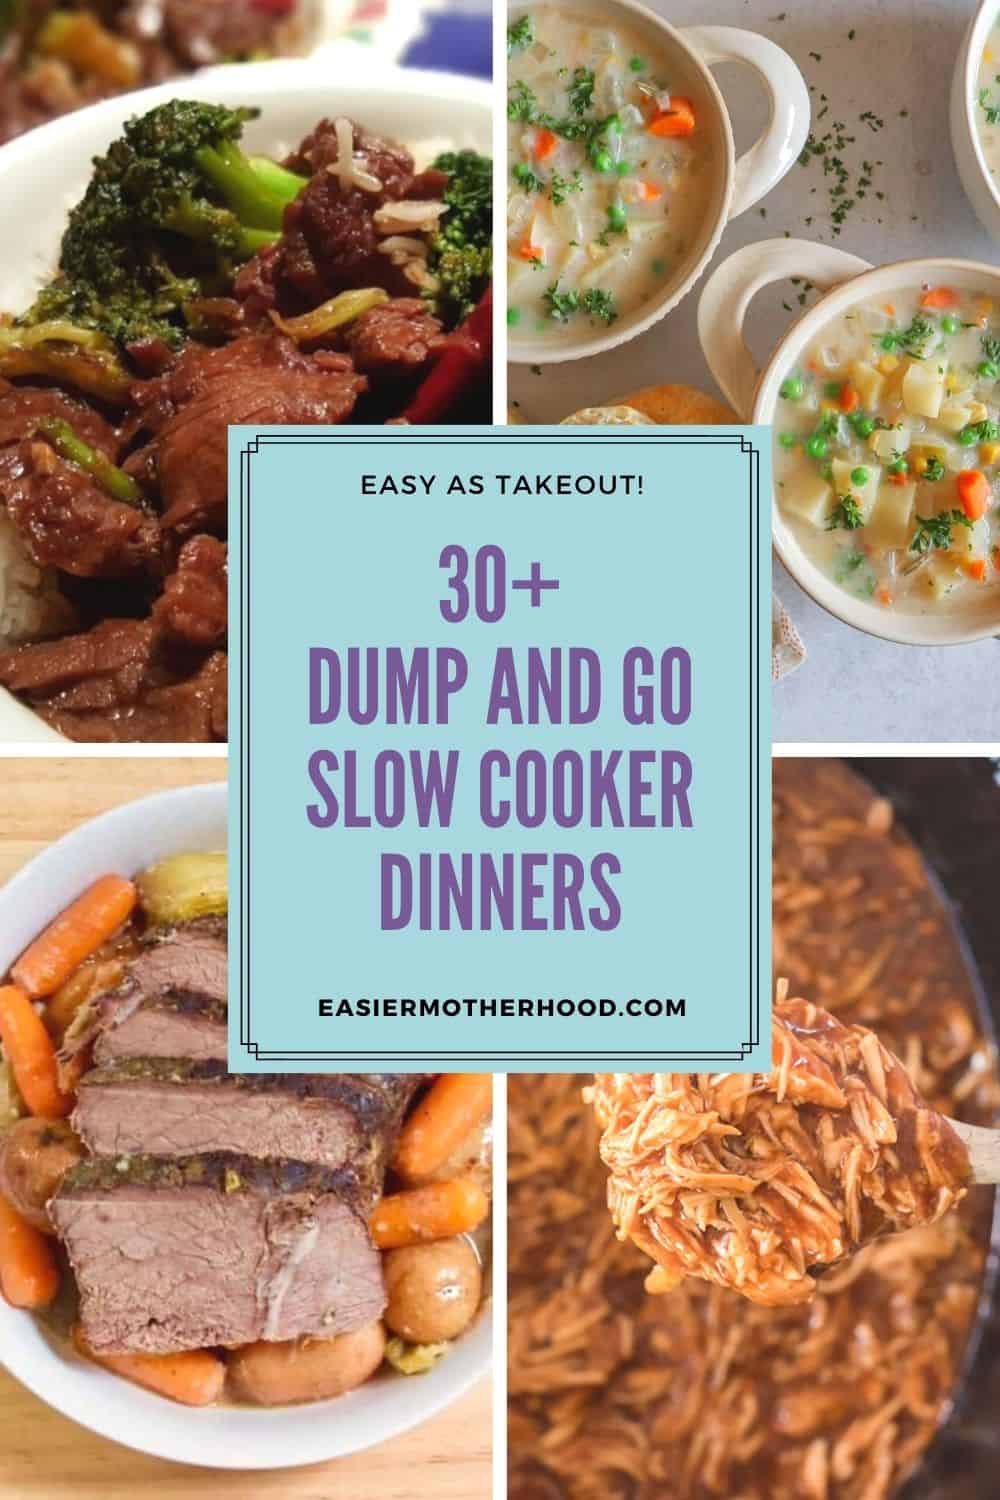 Four images of crock pot meals with overlaying text "30+ dump and go slow cooker dinners"